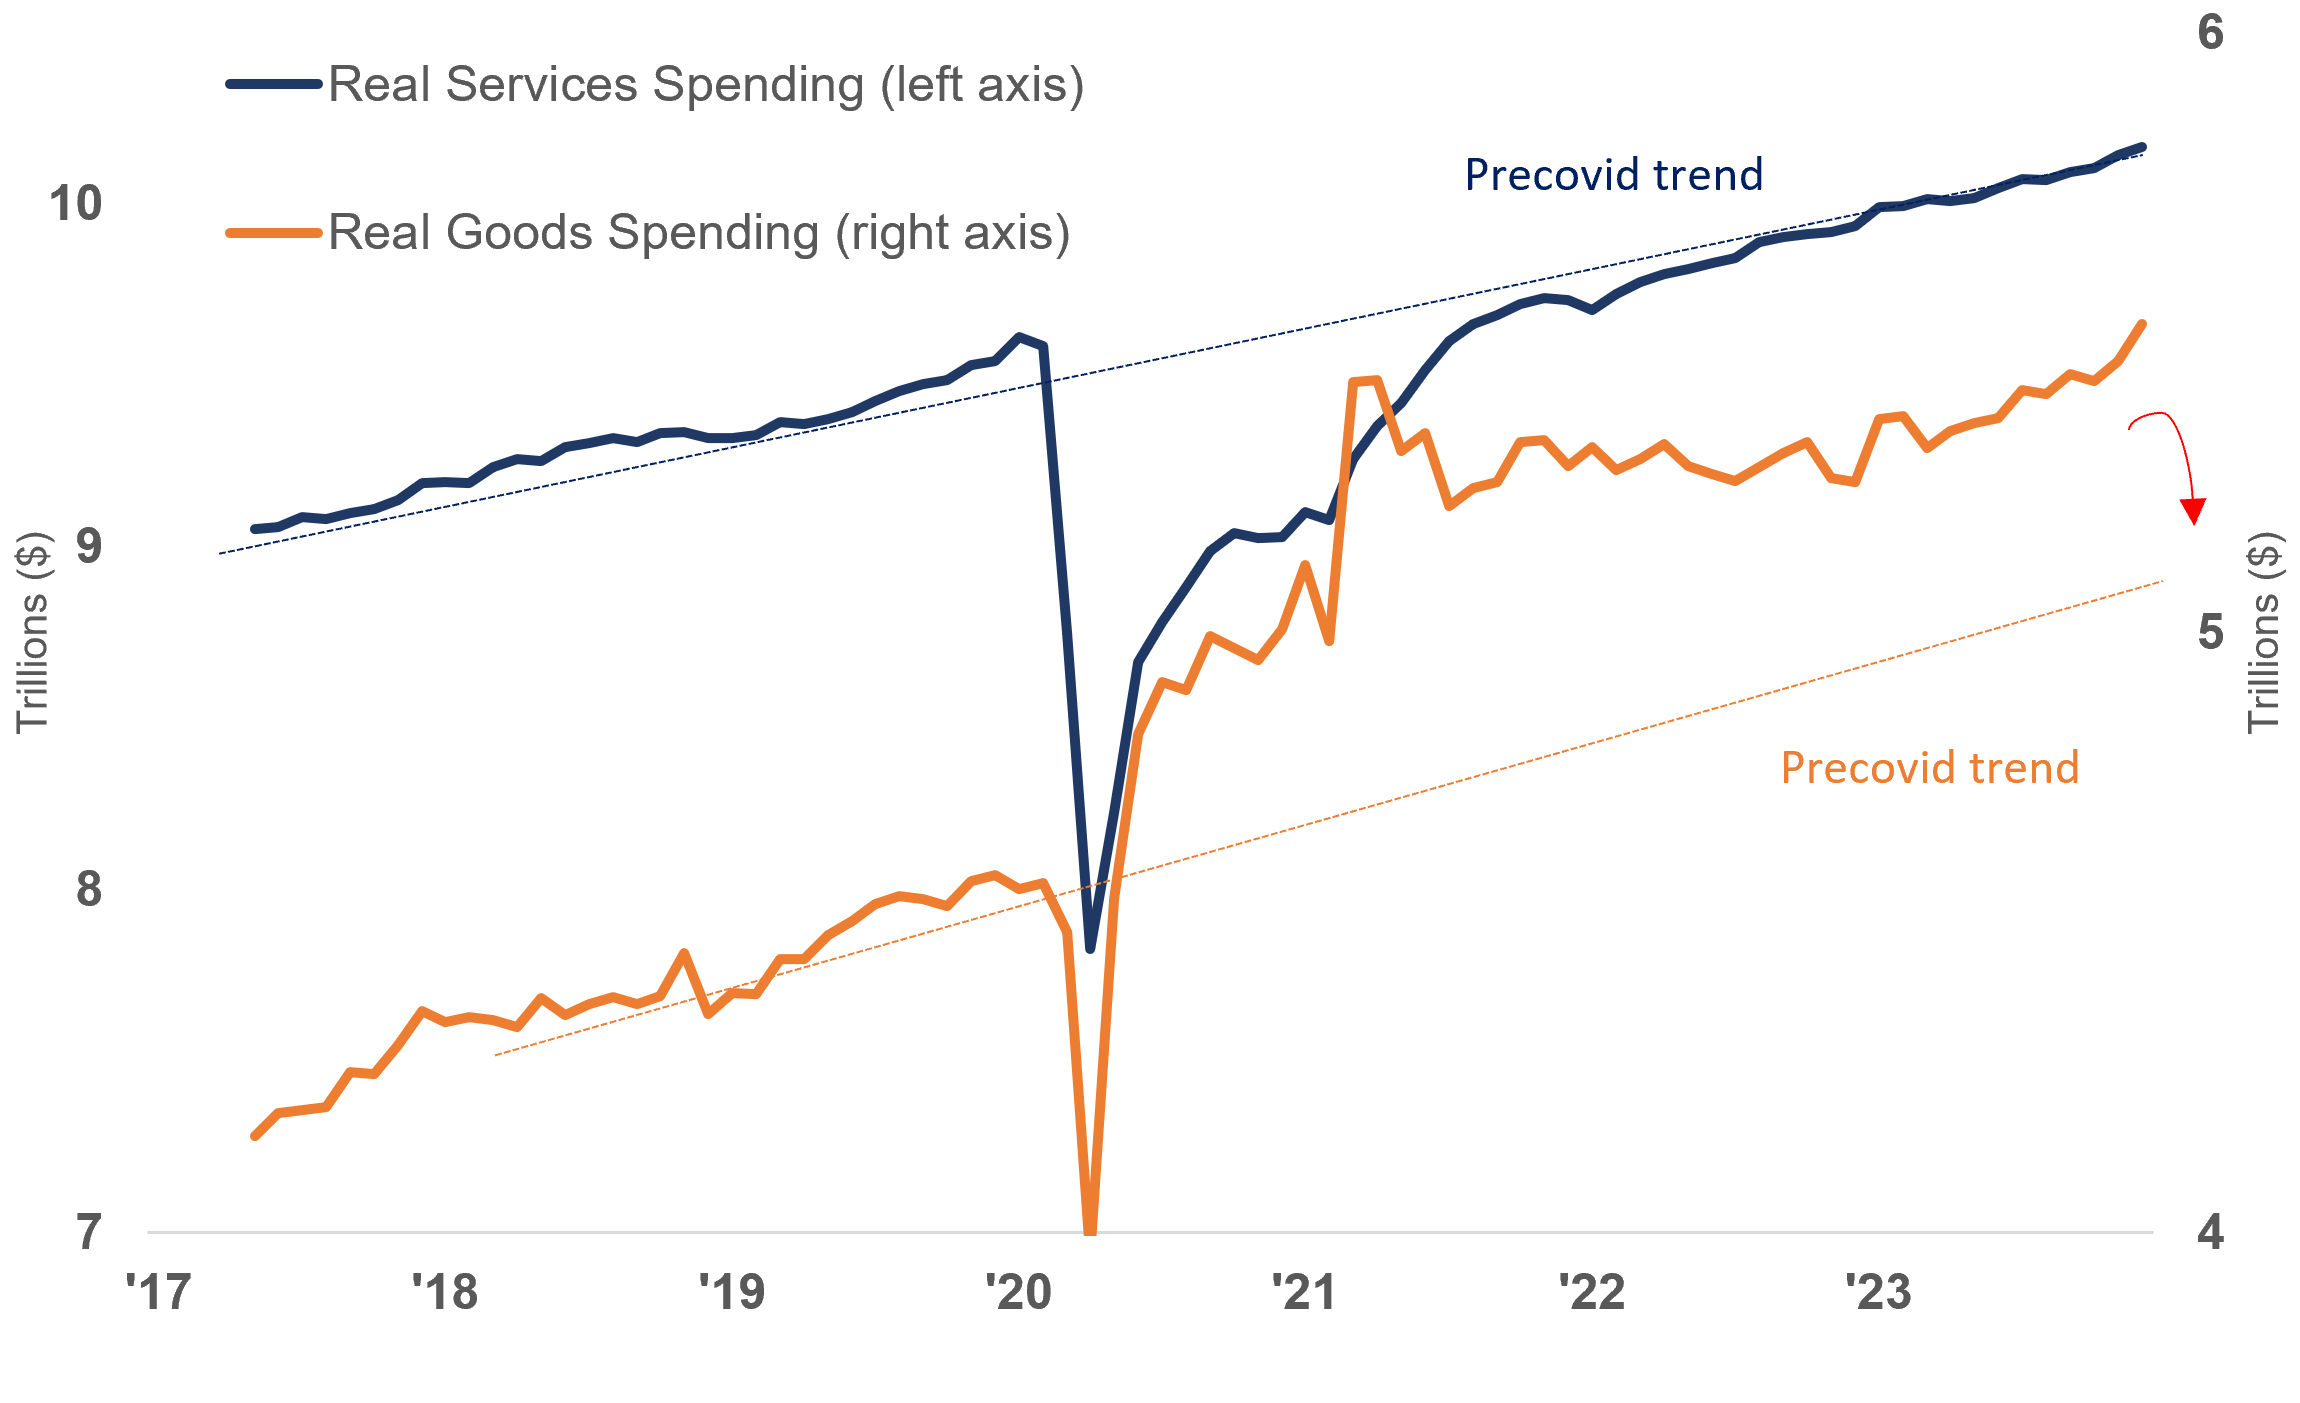 Line graph depicting real services and real goods spending from 2017-2024 in trillions of dollars back to pre-pandemic trend as described in preceding paragraph.